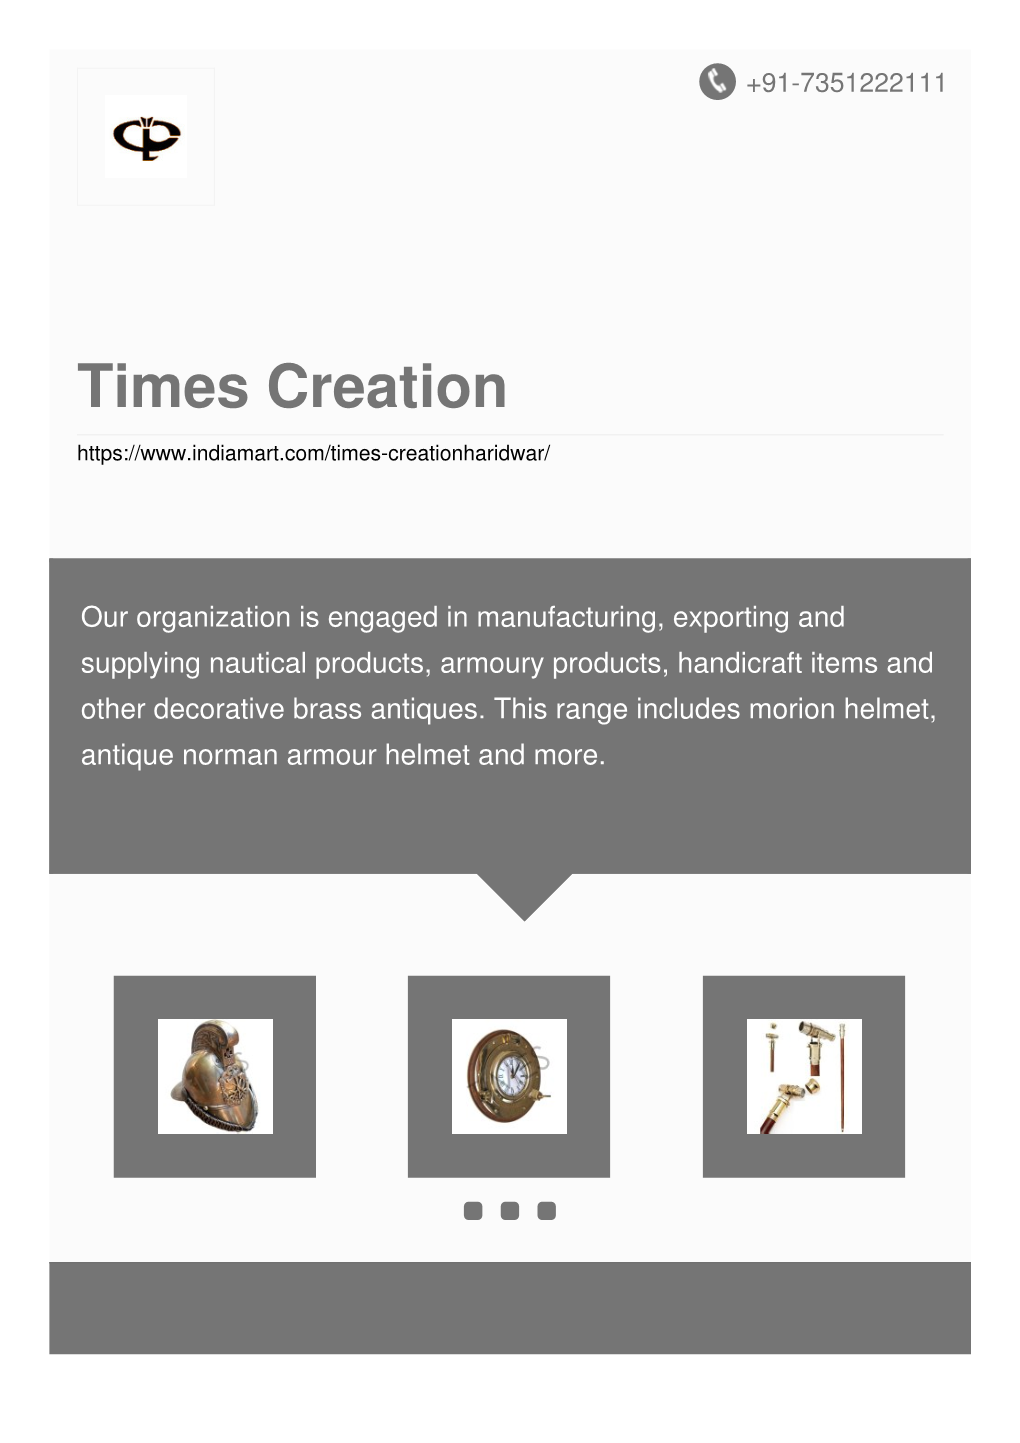 Times Creation